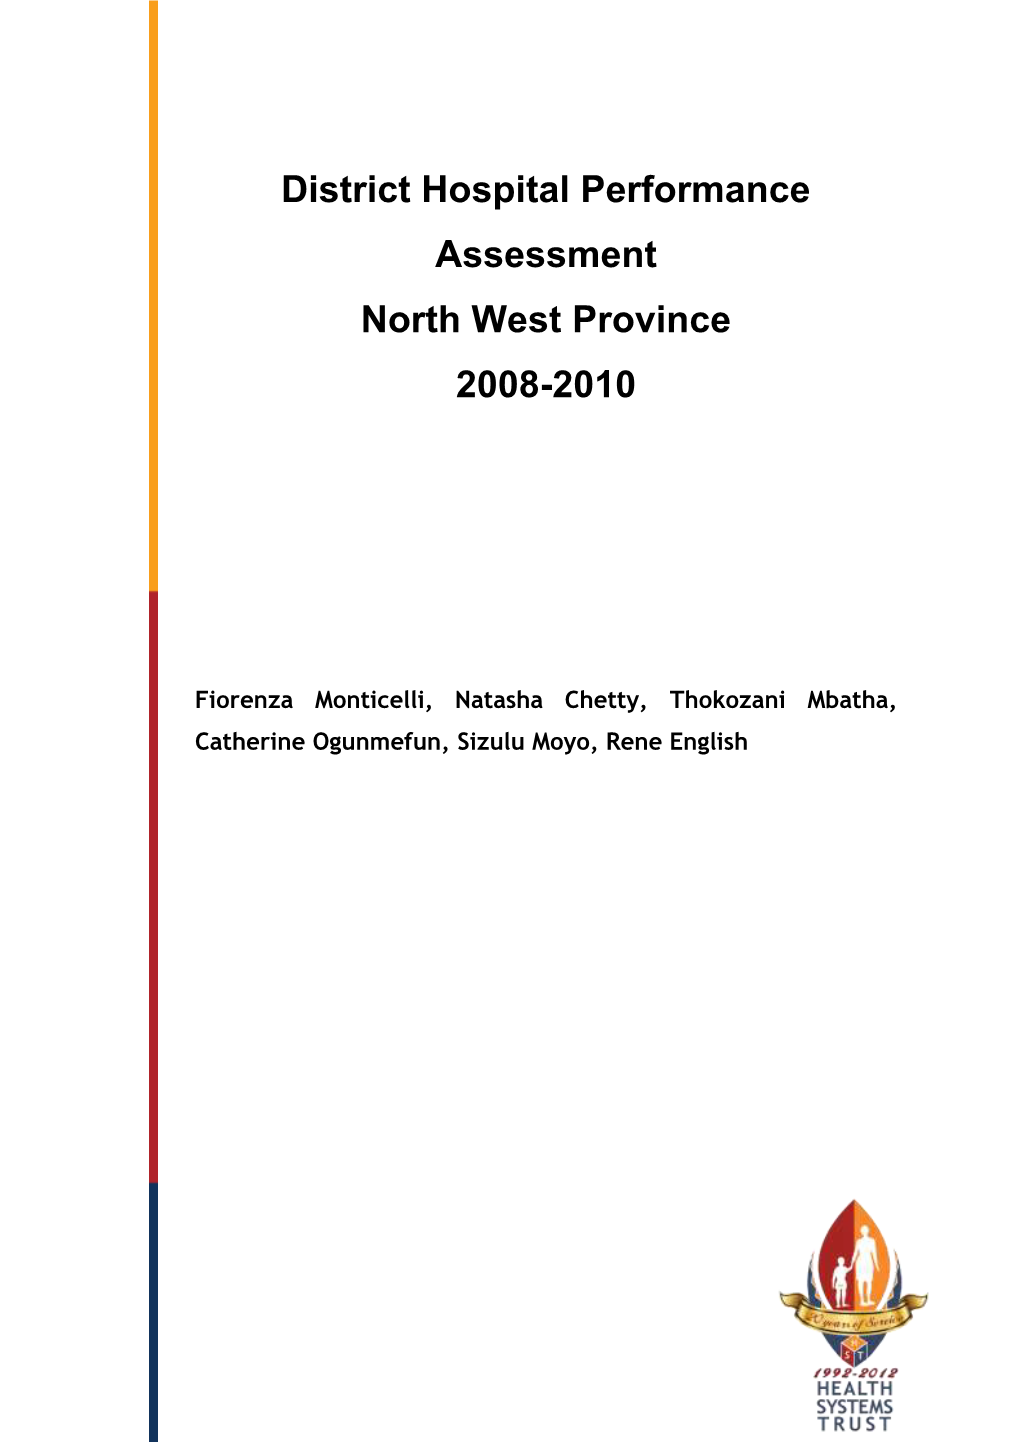 District Hospital Performance Assessment North West Province 2008-2010